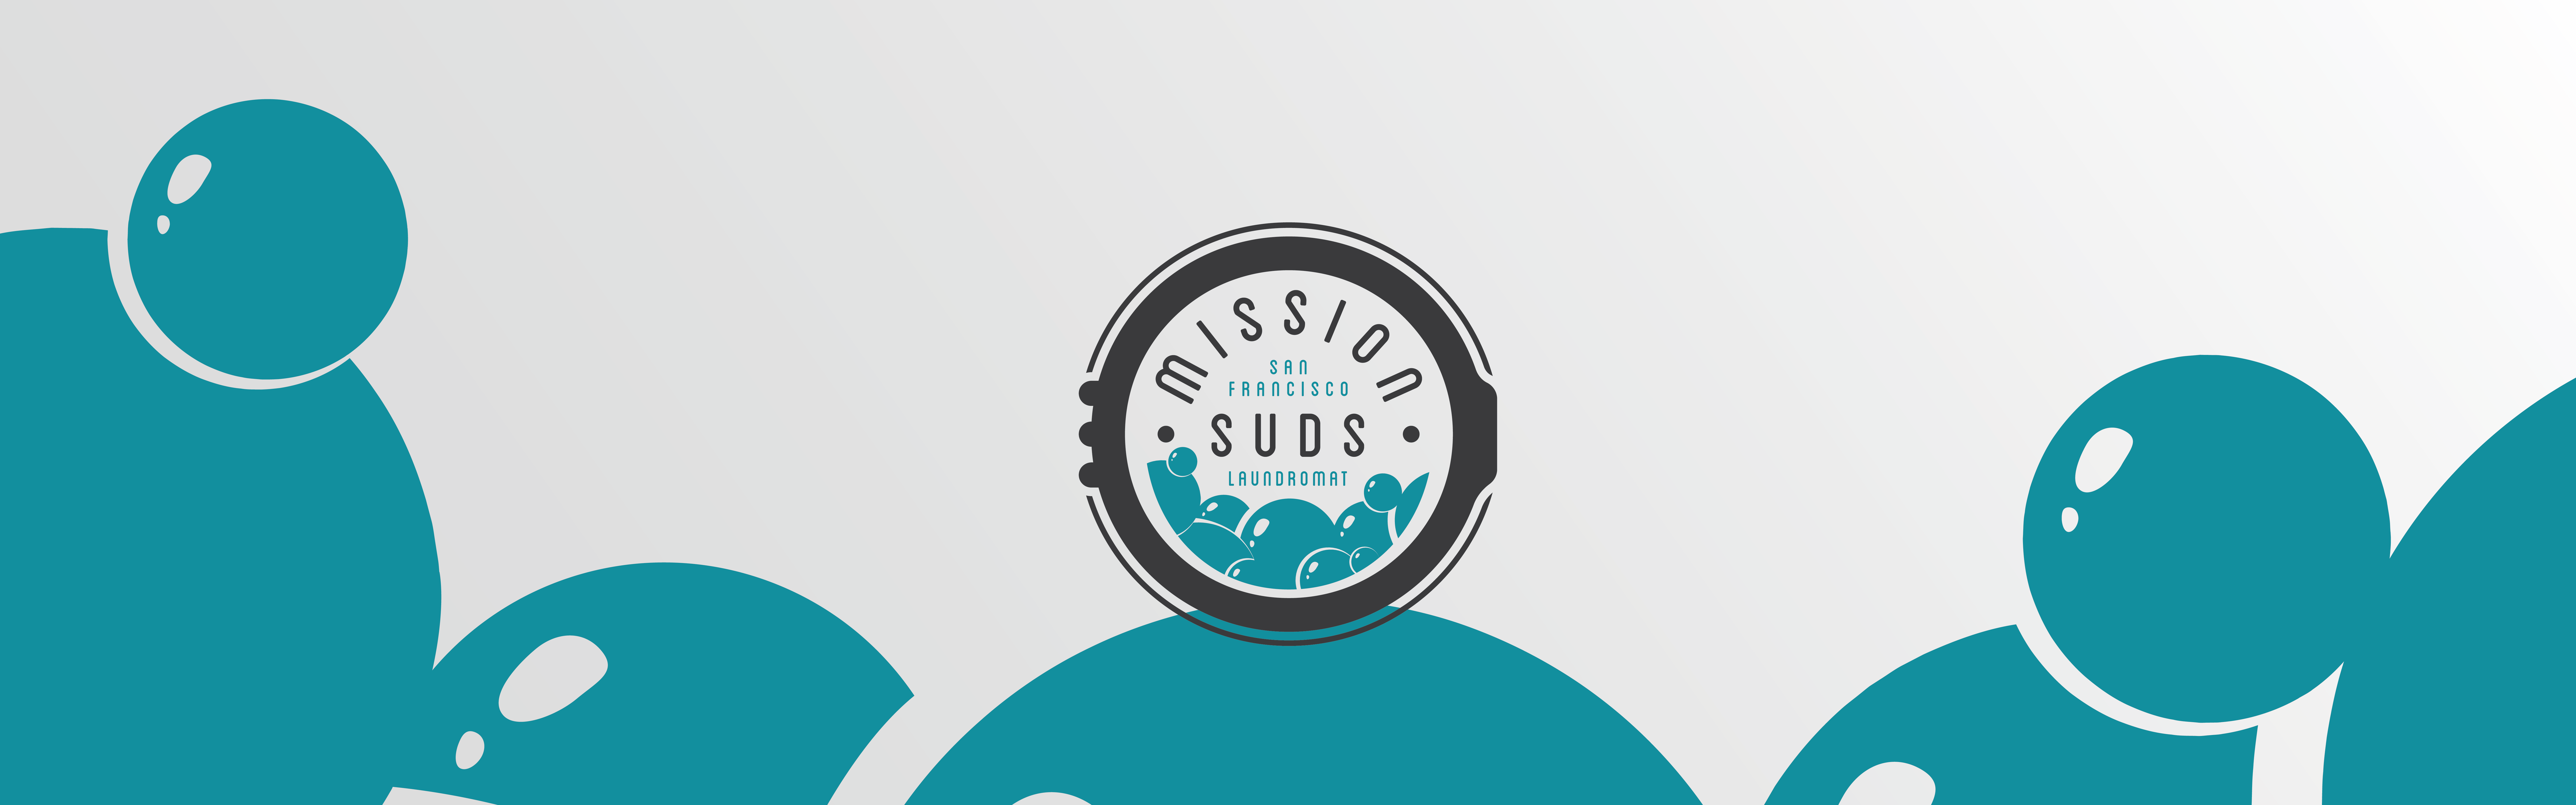 A graphic banner featuring a central emblem with the text "Mission Suds Laundromat" surrounded by stylized blue bubbles on a light background.